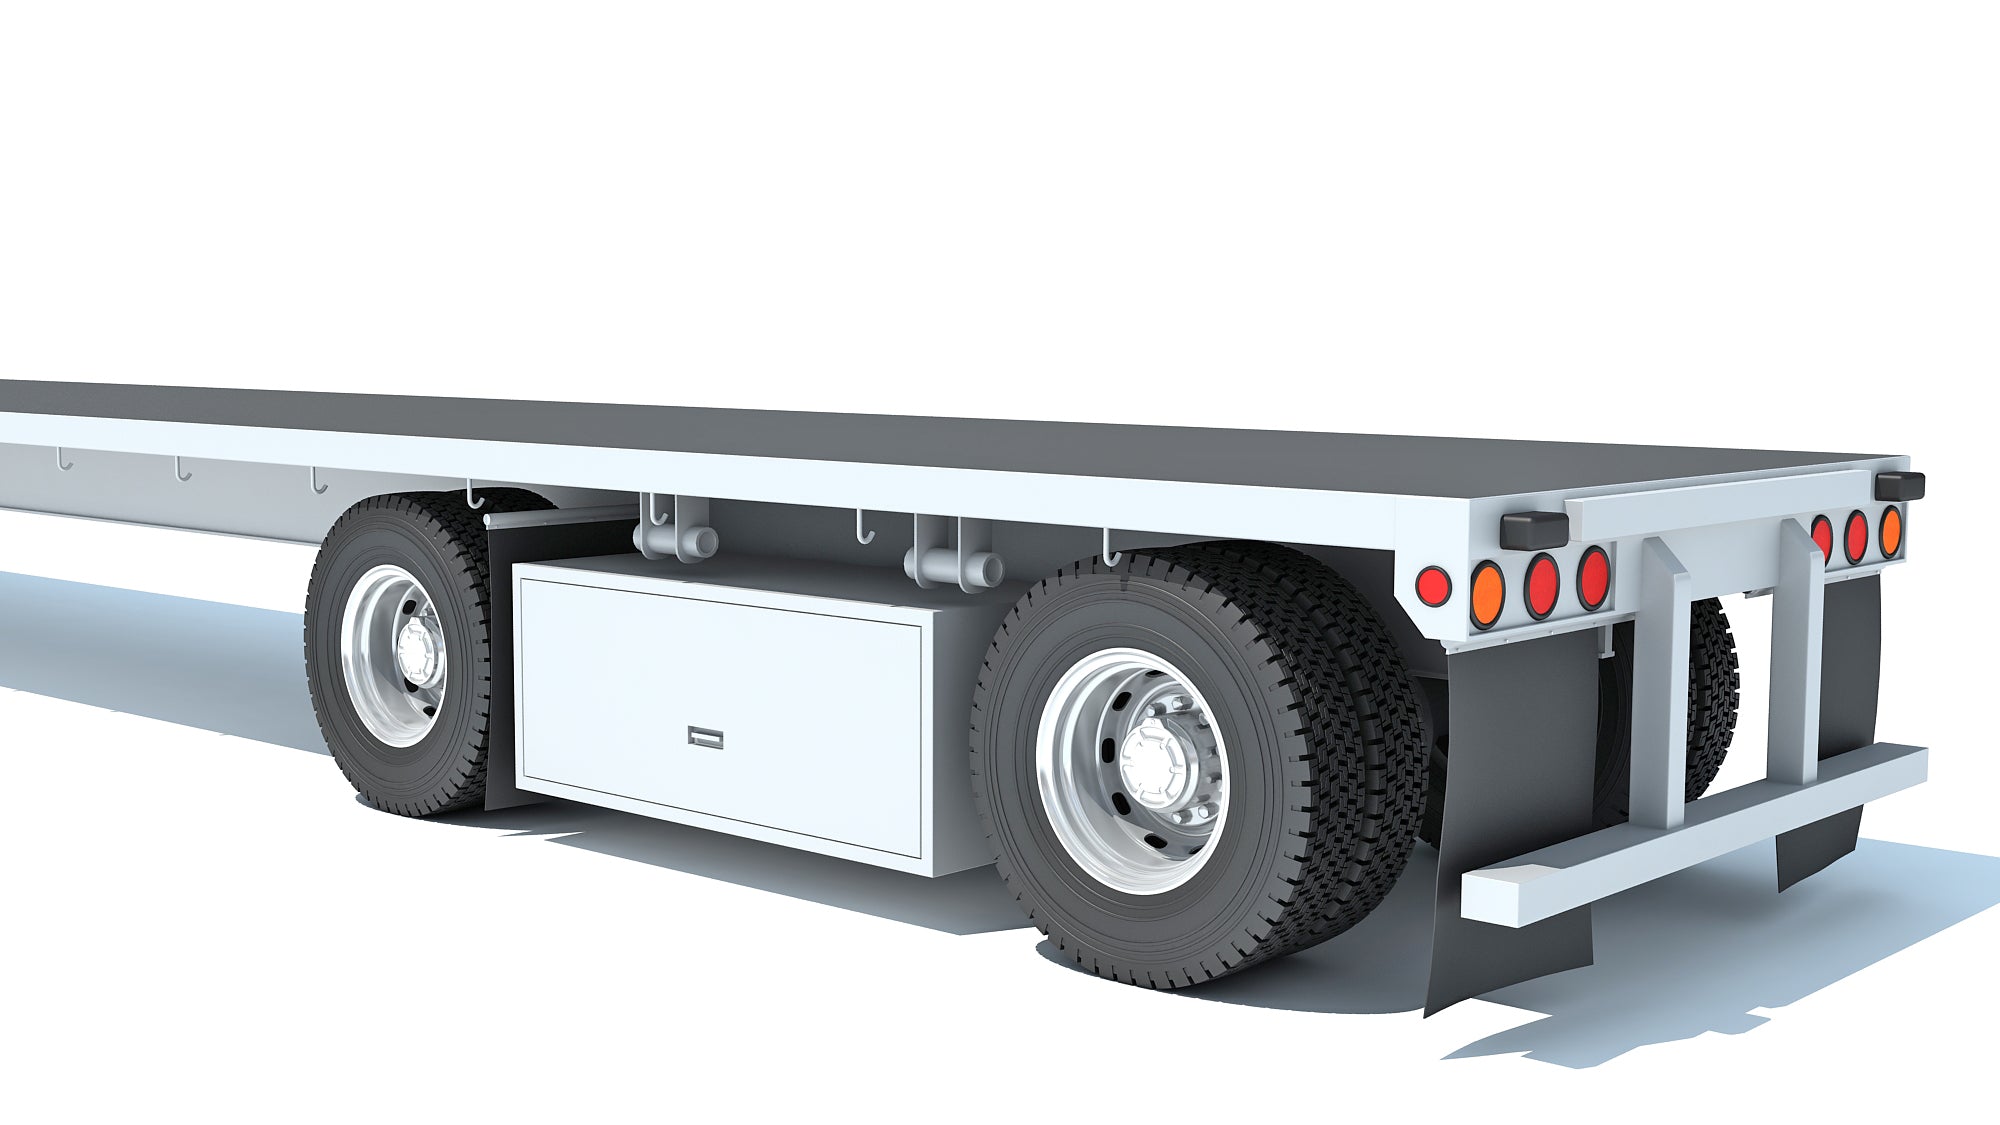 Truck with Flatbed Trailer - DAF